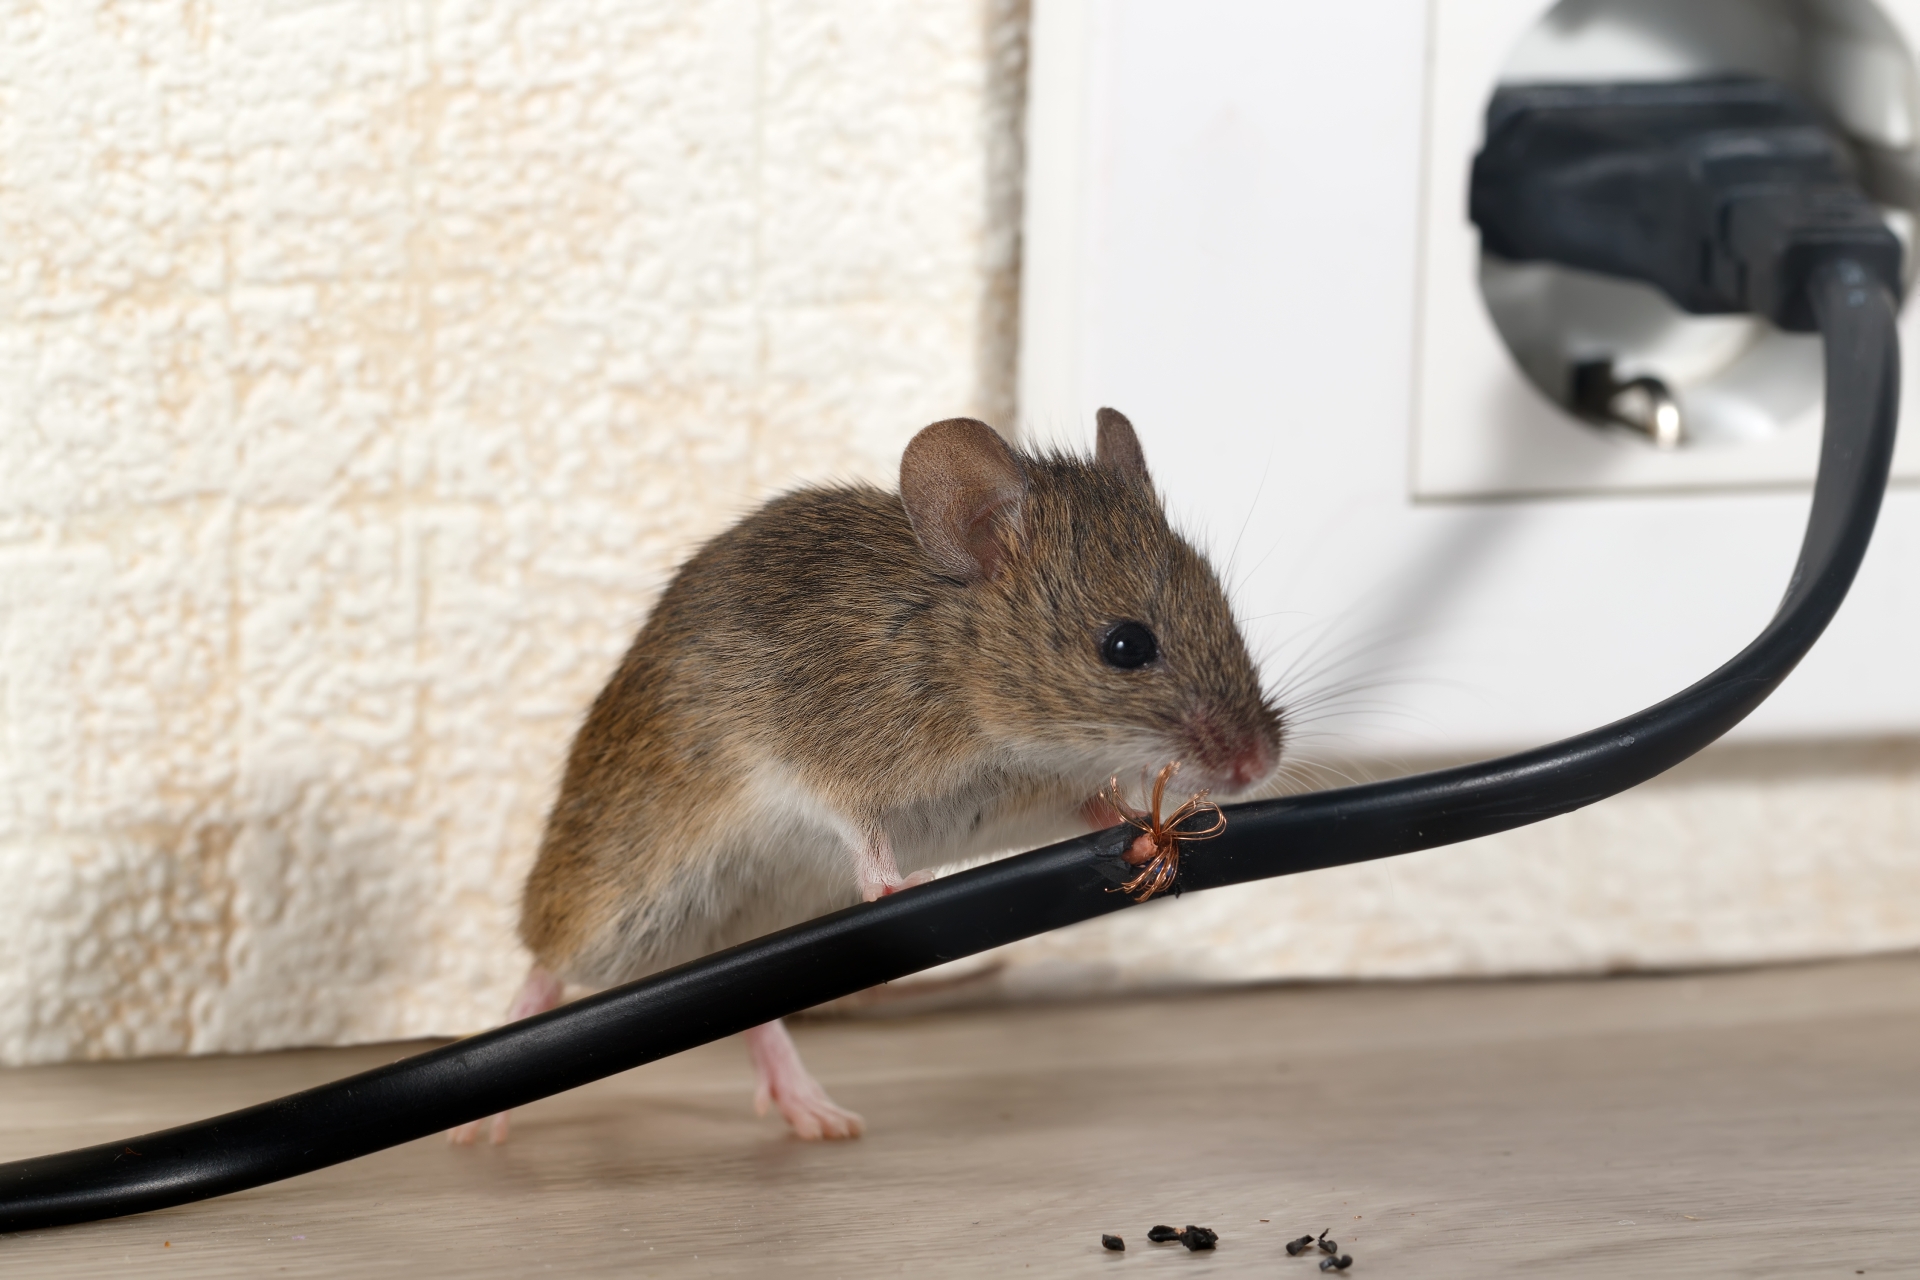 Mice Infestation, Pest Control in Highbury, N5. Call Now 020 8166 9746